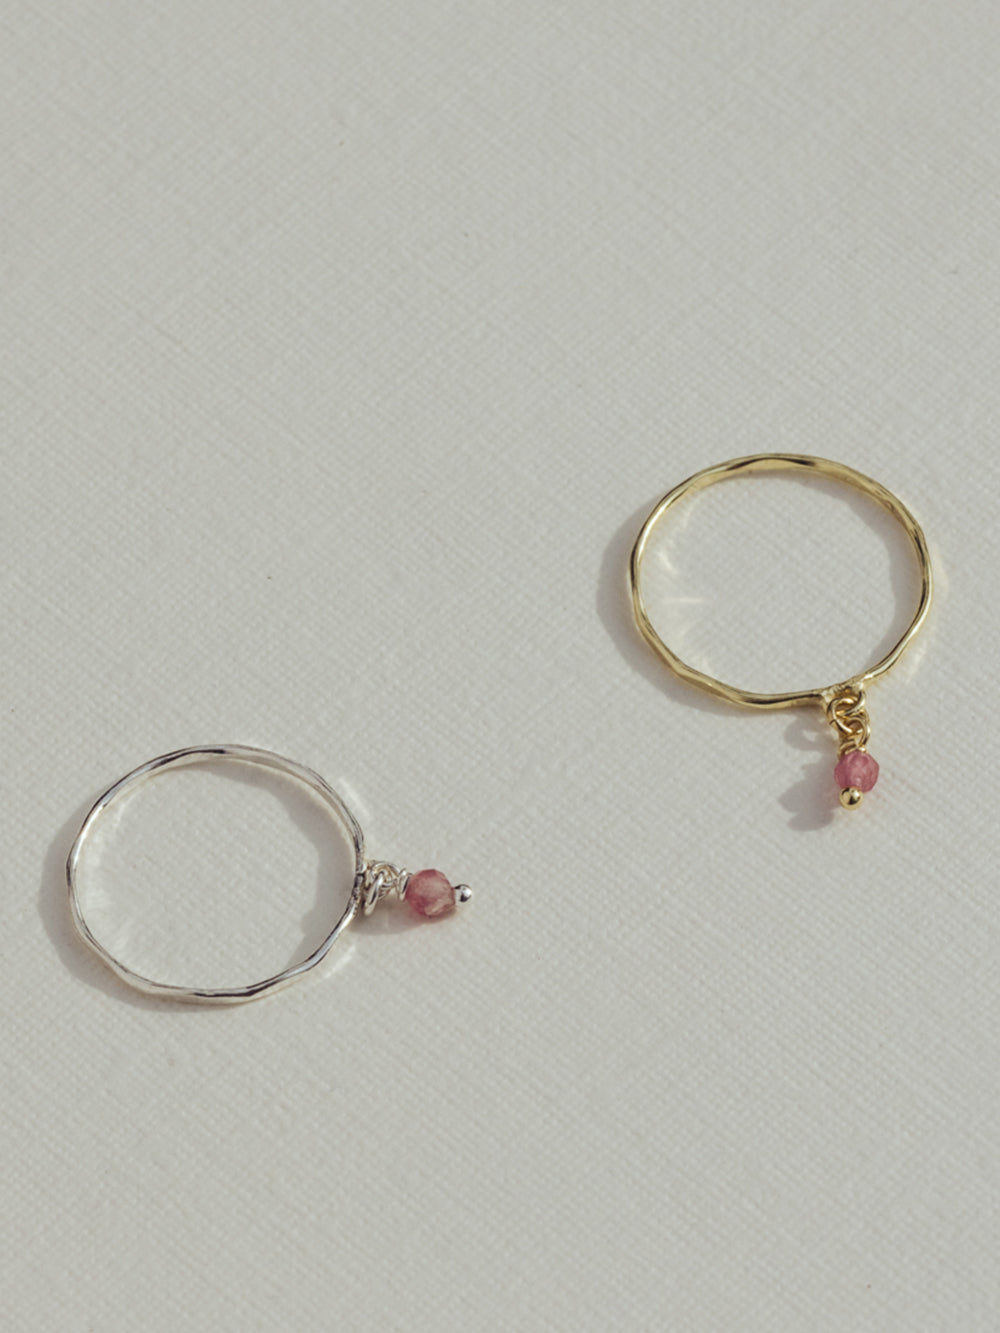 Birthstone ring October - Pink Tourmaline | 14K Gold Plated